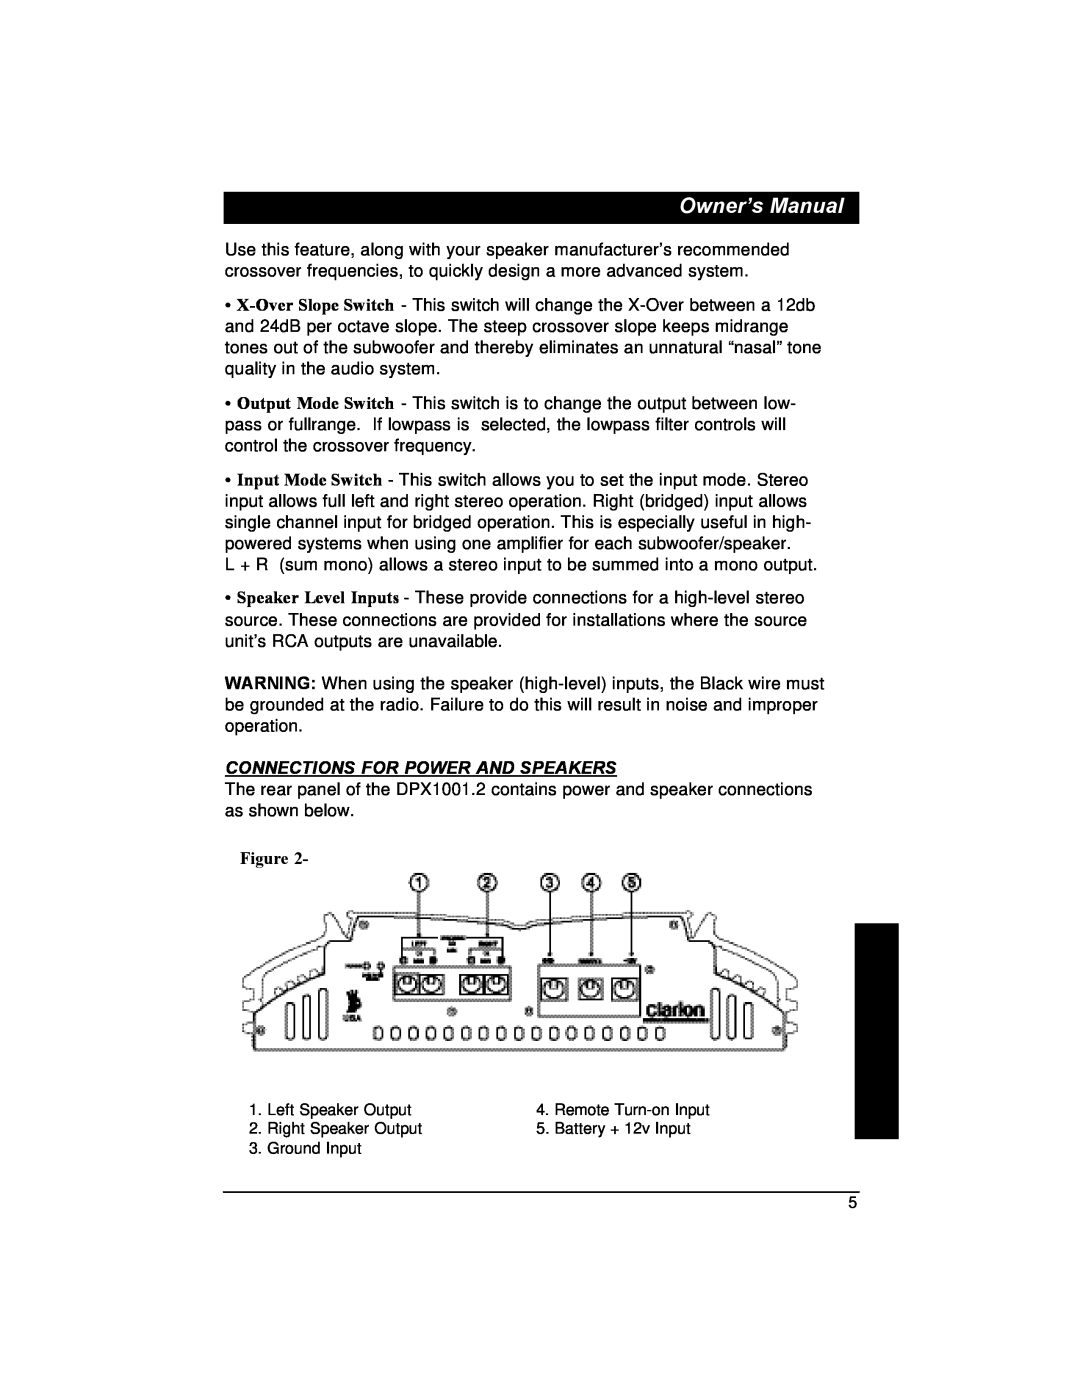 Clarion DPX1001.2 installation manual Connections For Power And Speakers 